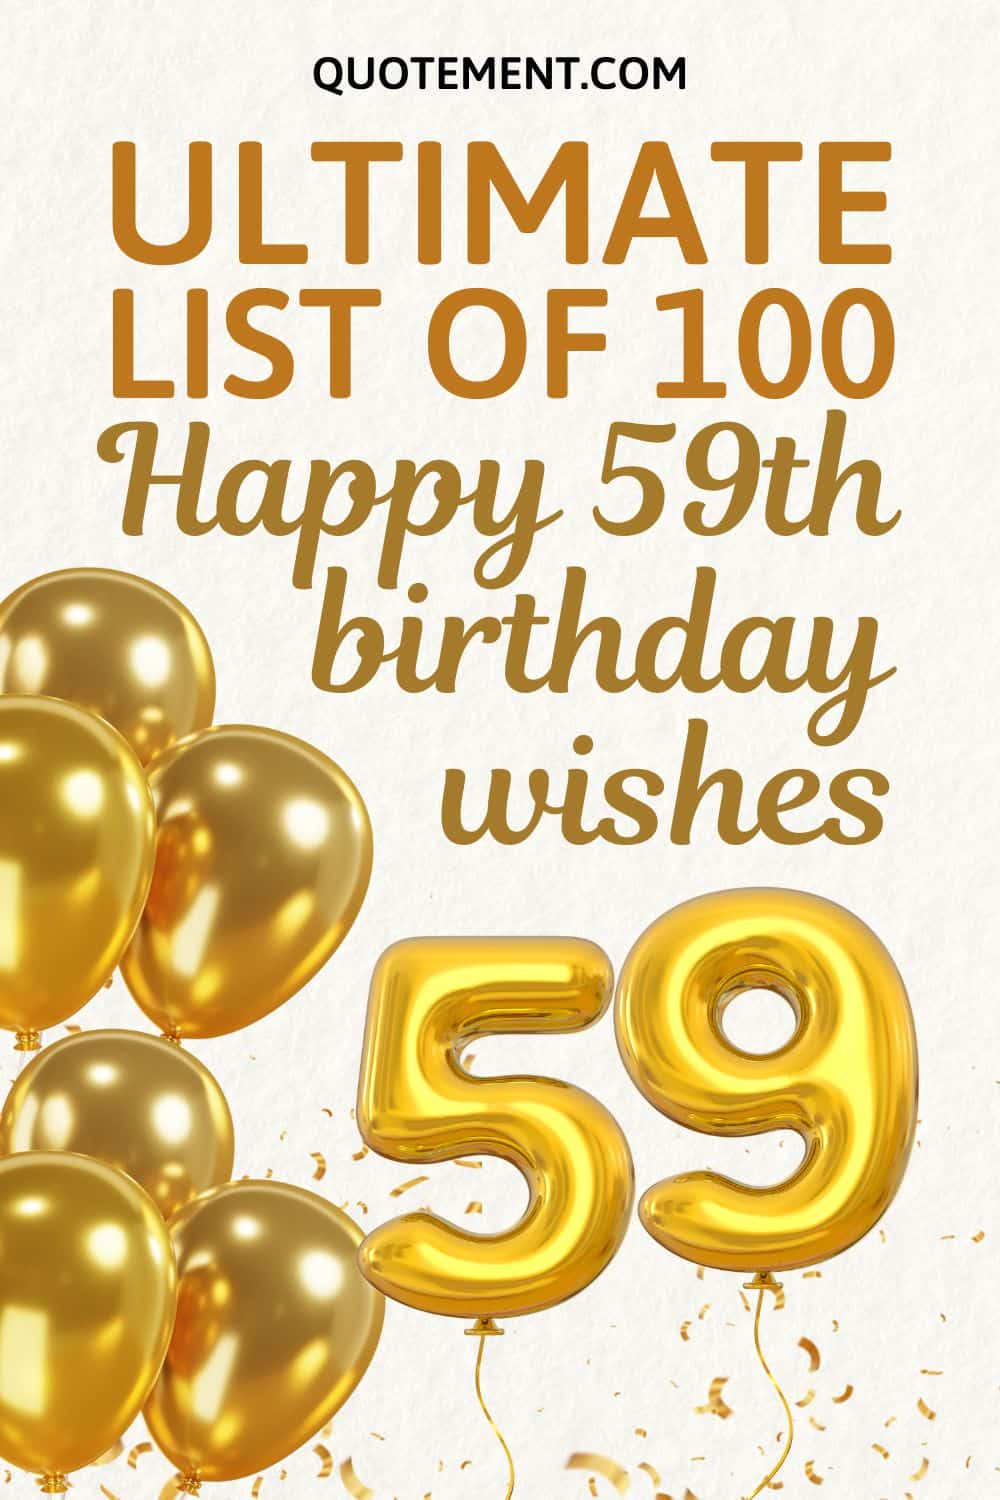 100 Happy 59th Birthday Wishes To Send To Your Loved Ones